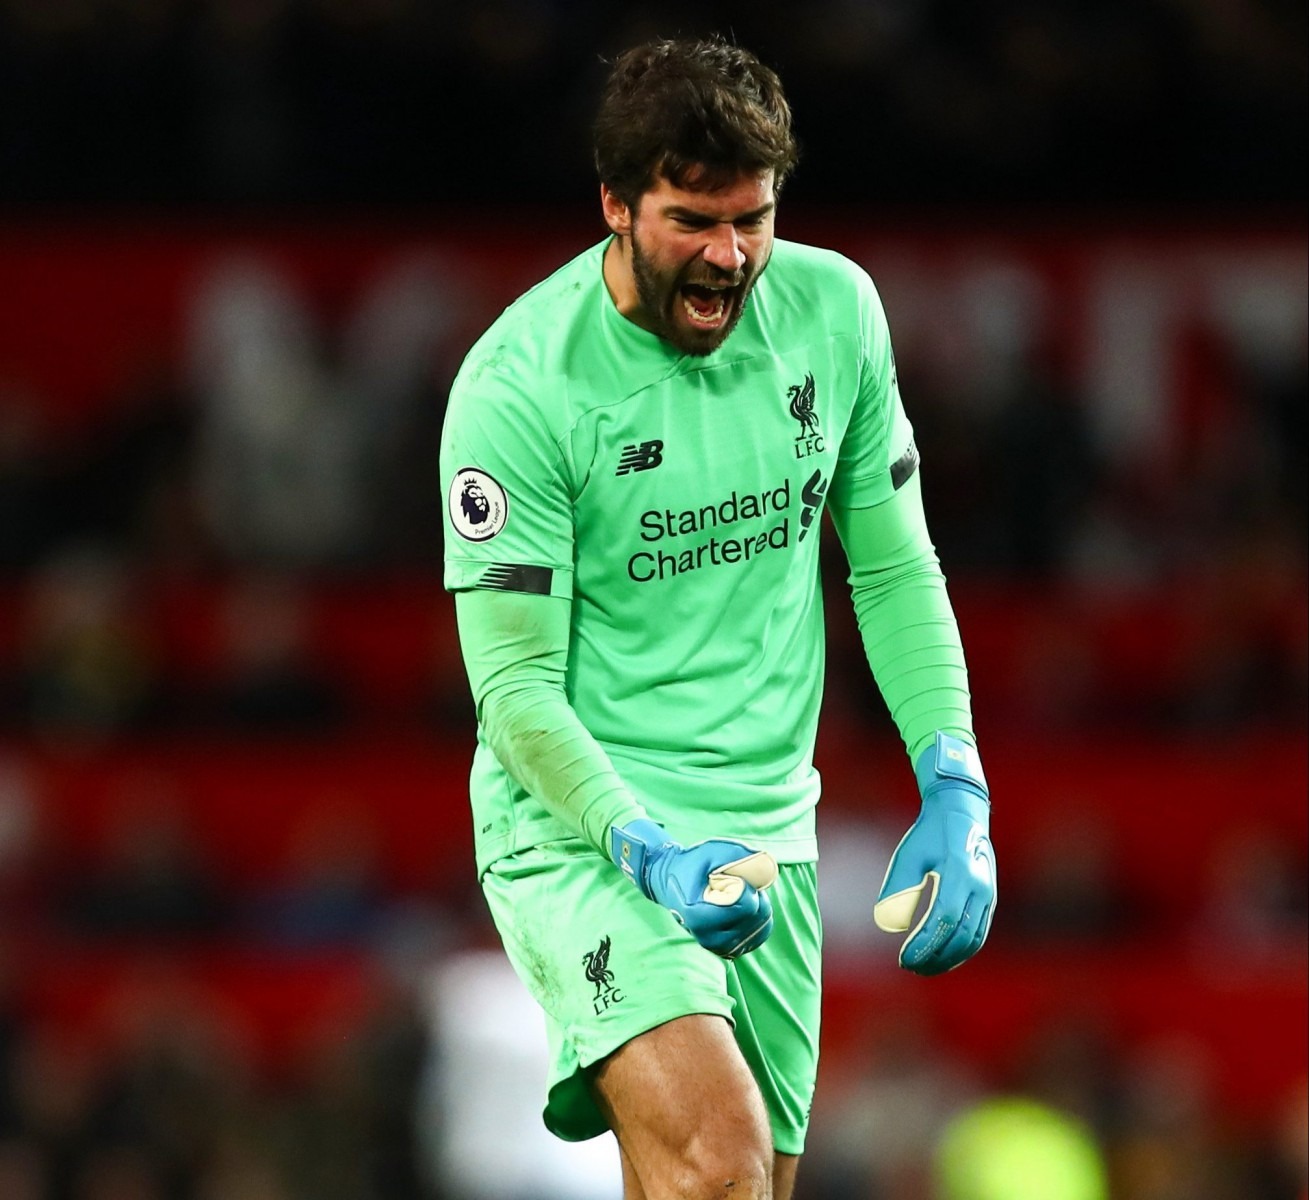 Liverpool spending so much on Alisson shocked many people but has proved value for money